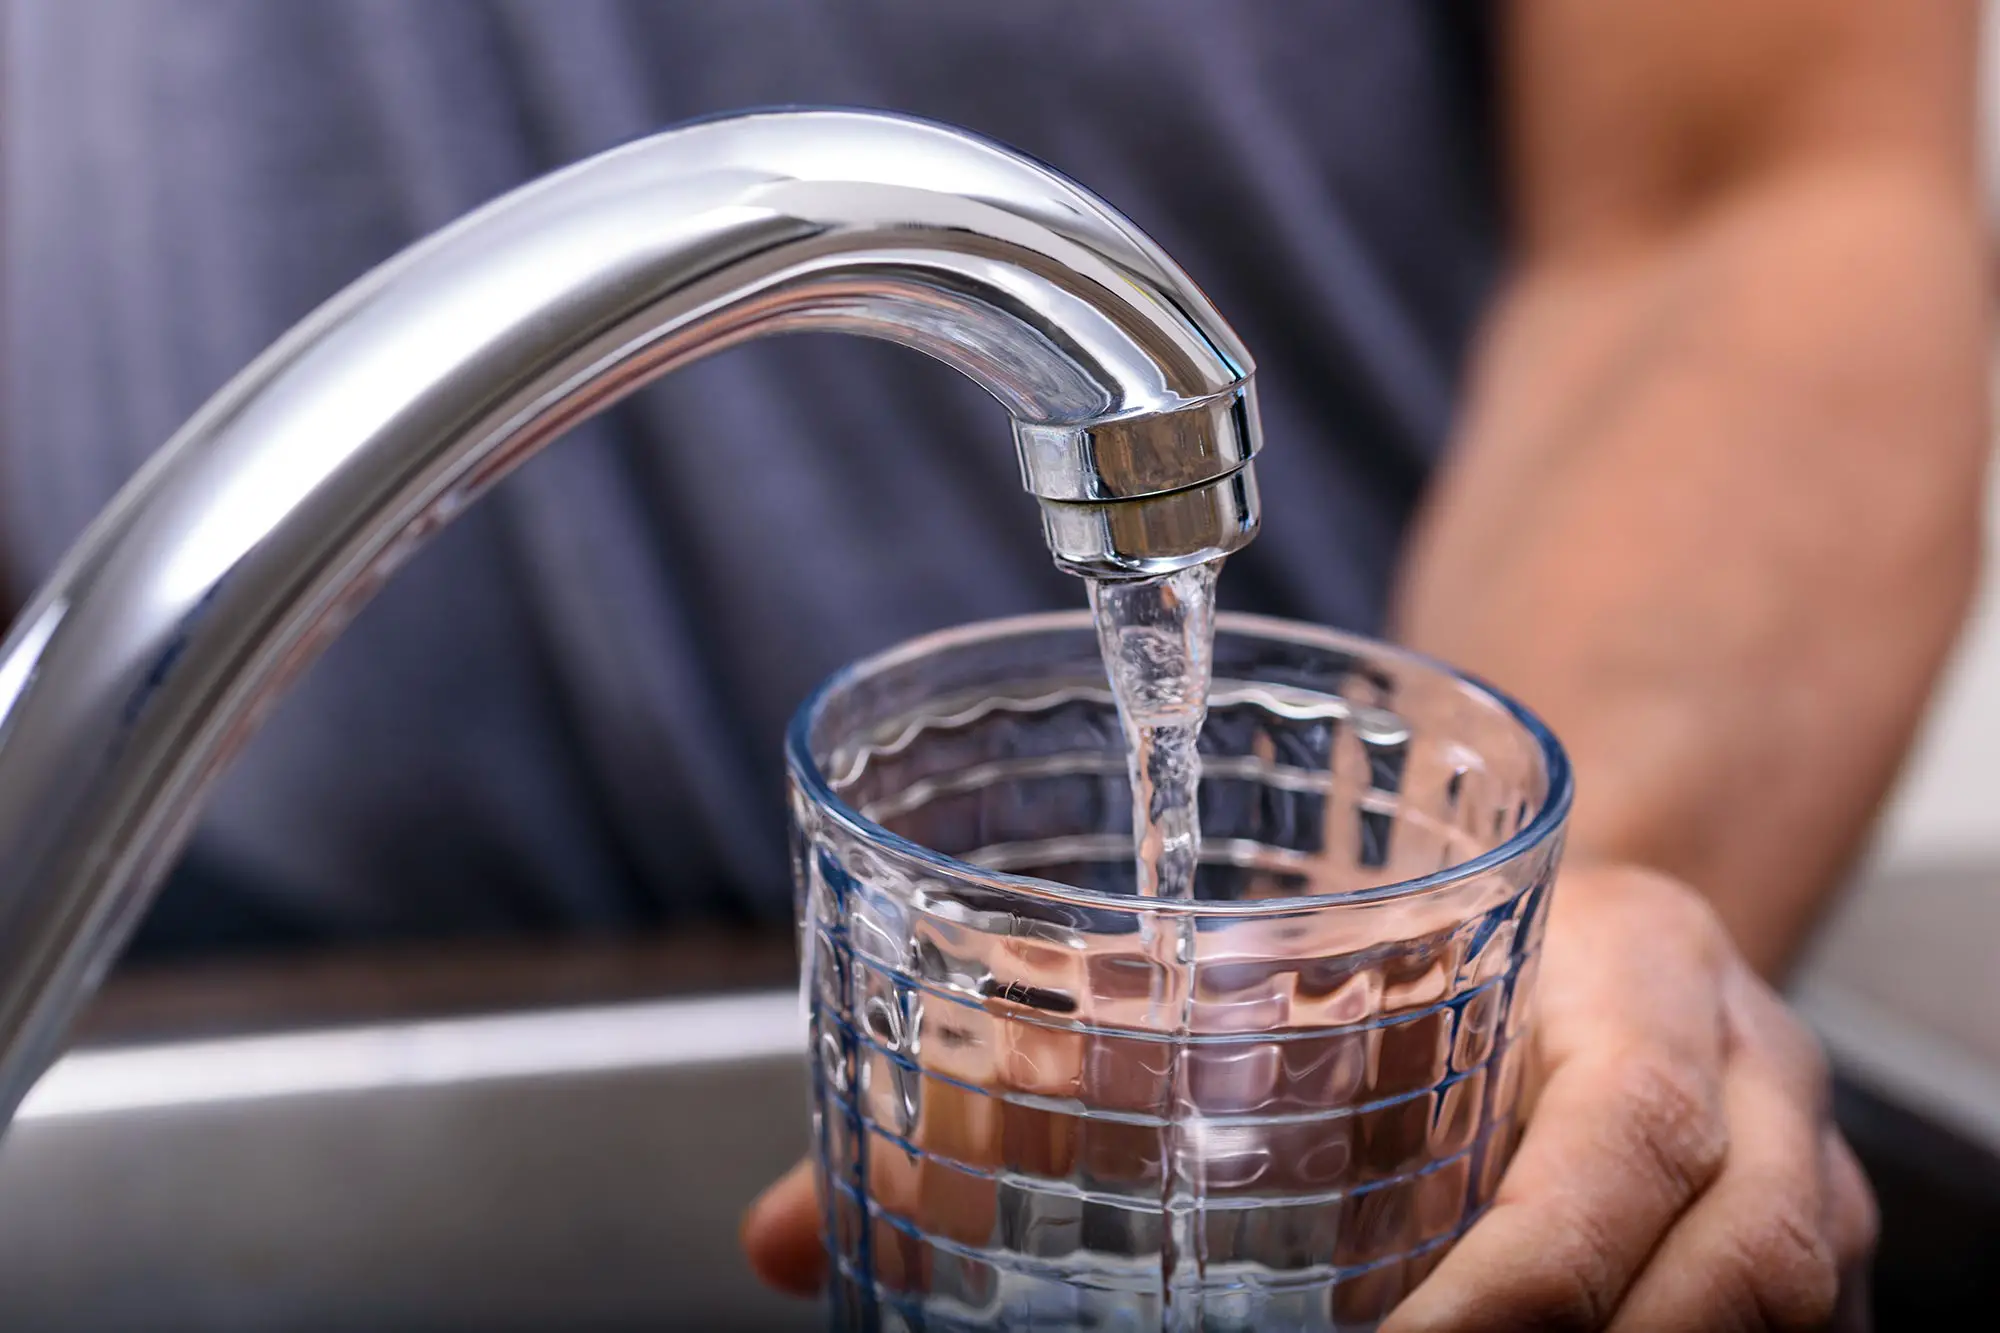 Natural contaminants in drinking water linked to autism